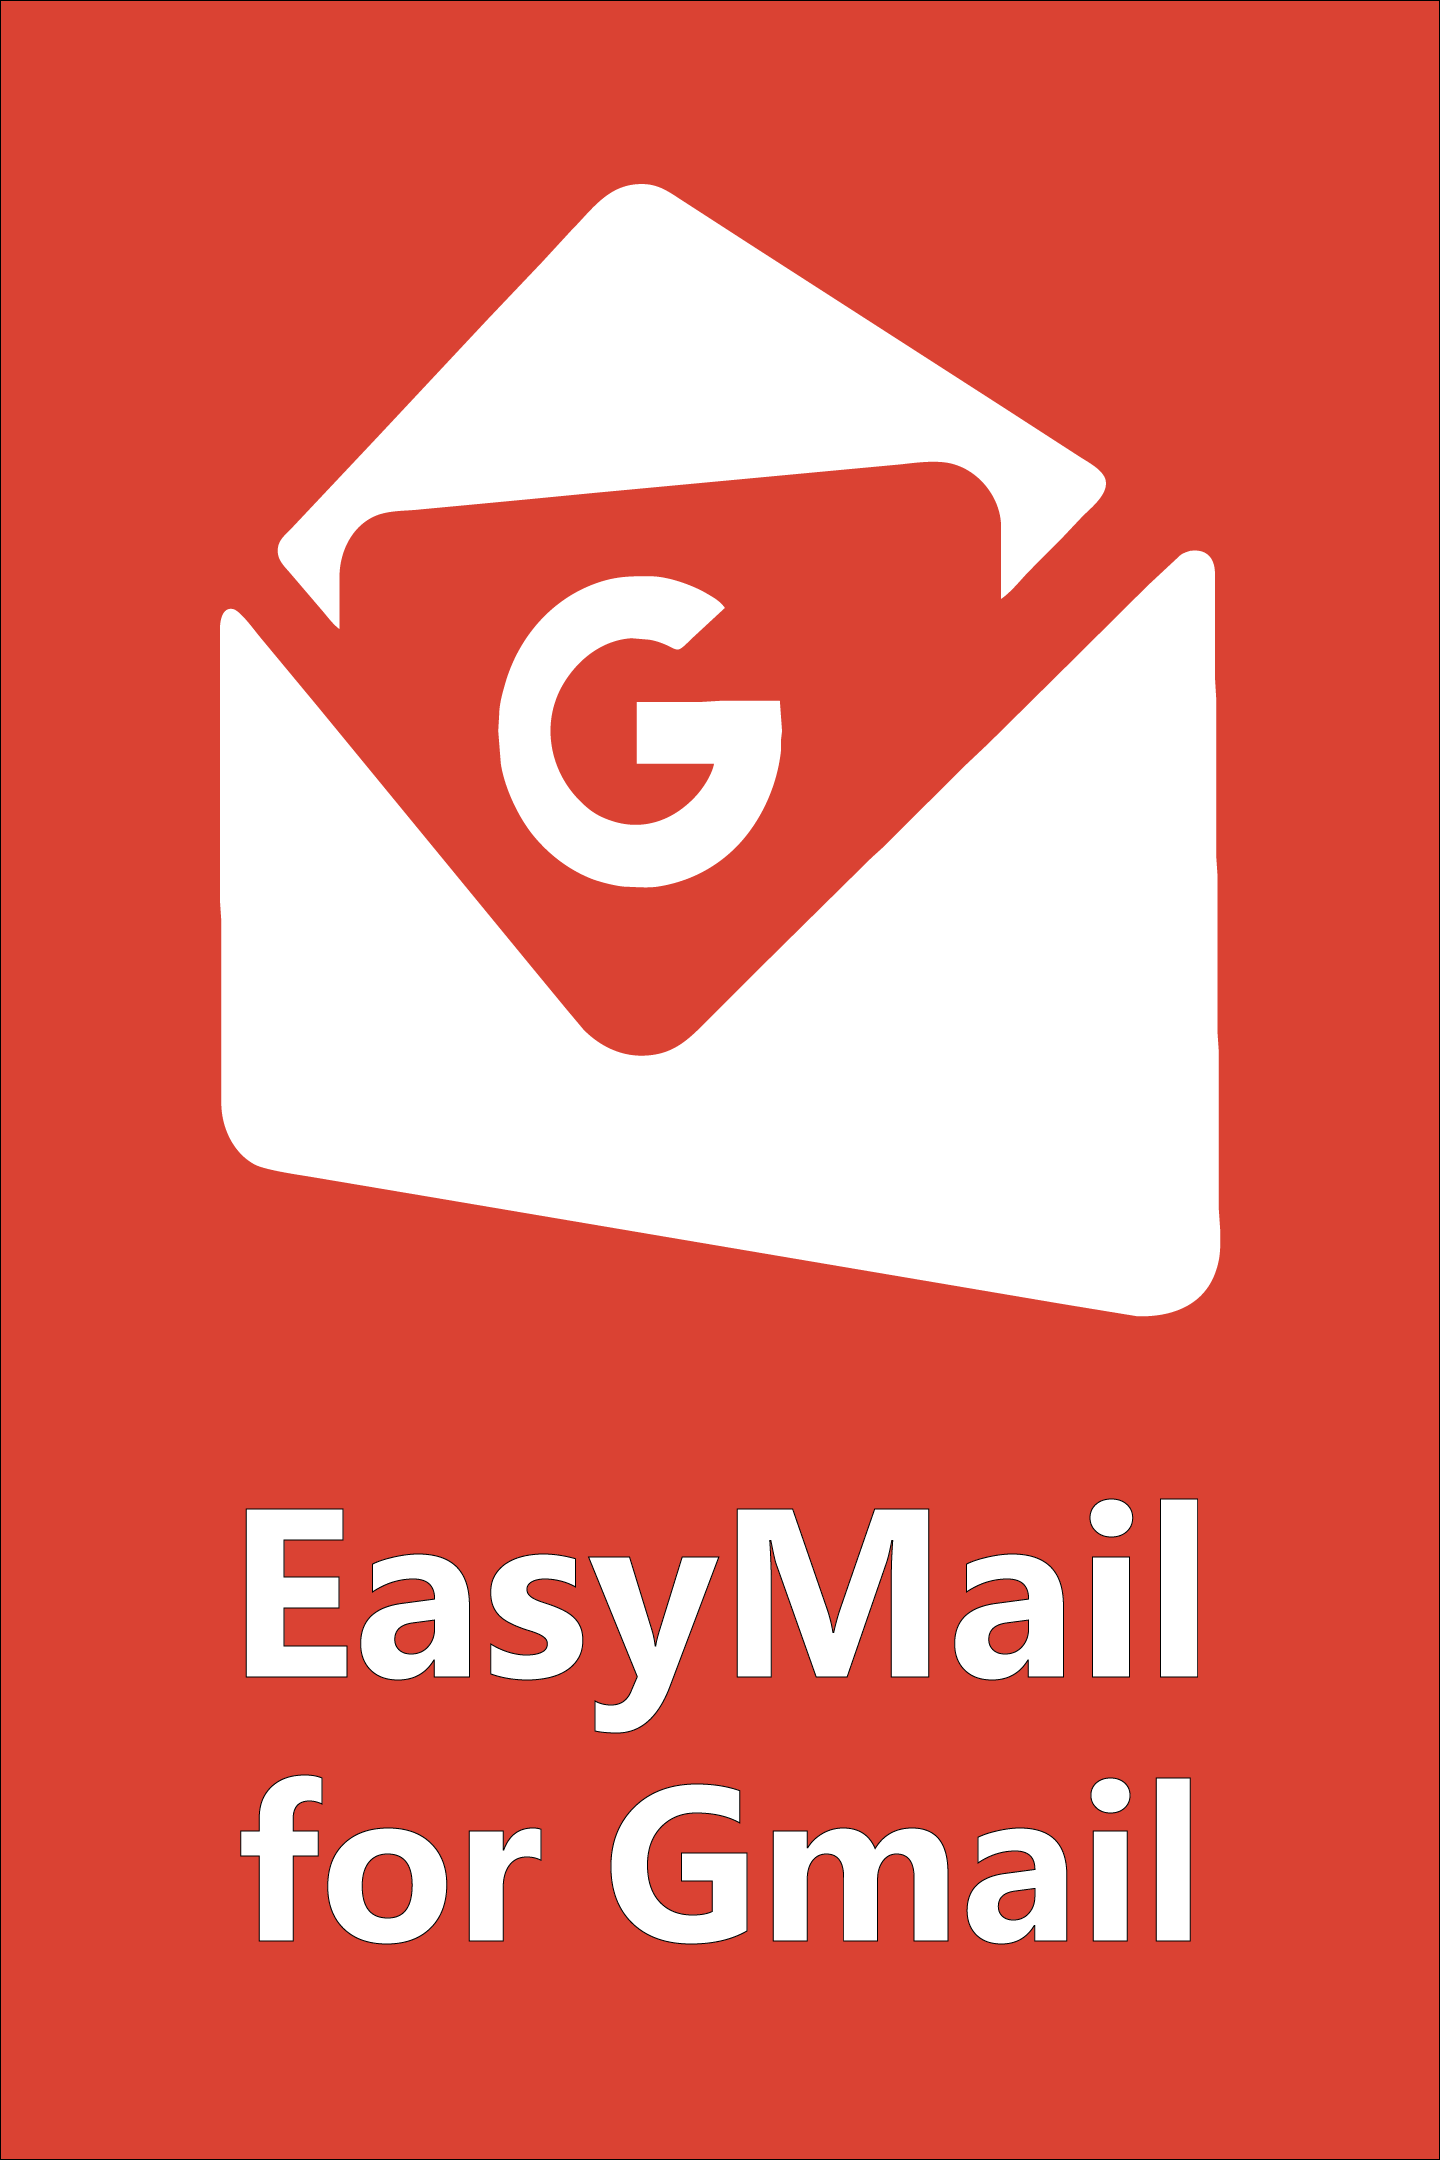 Download gmail app for laptop